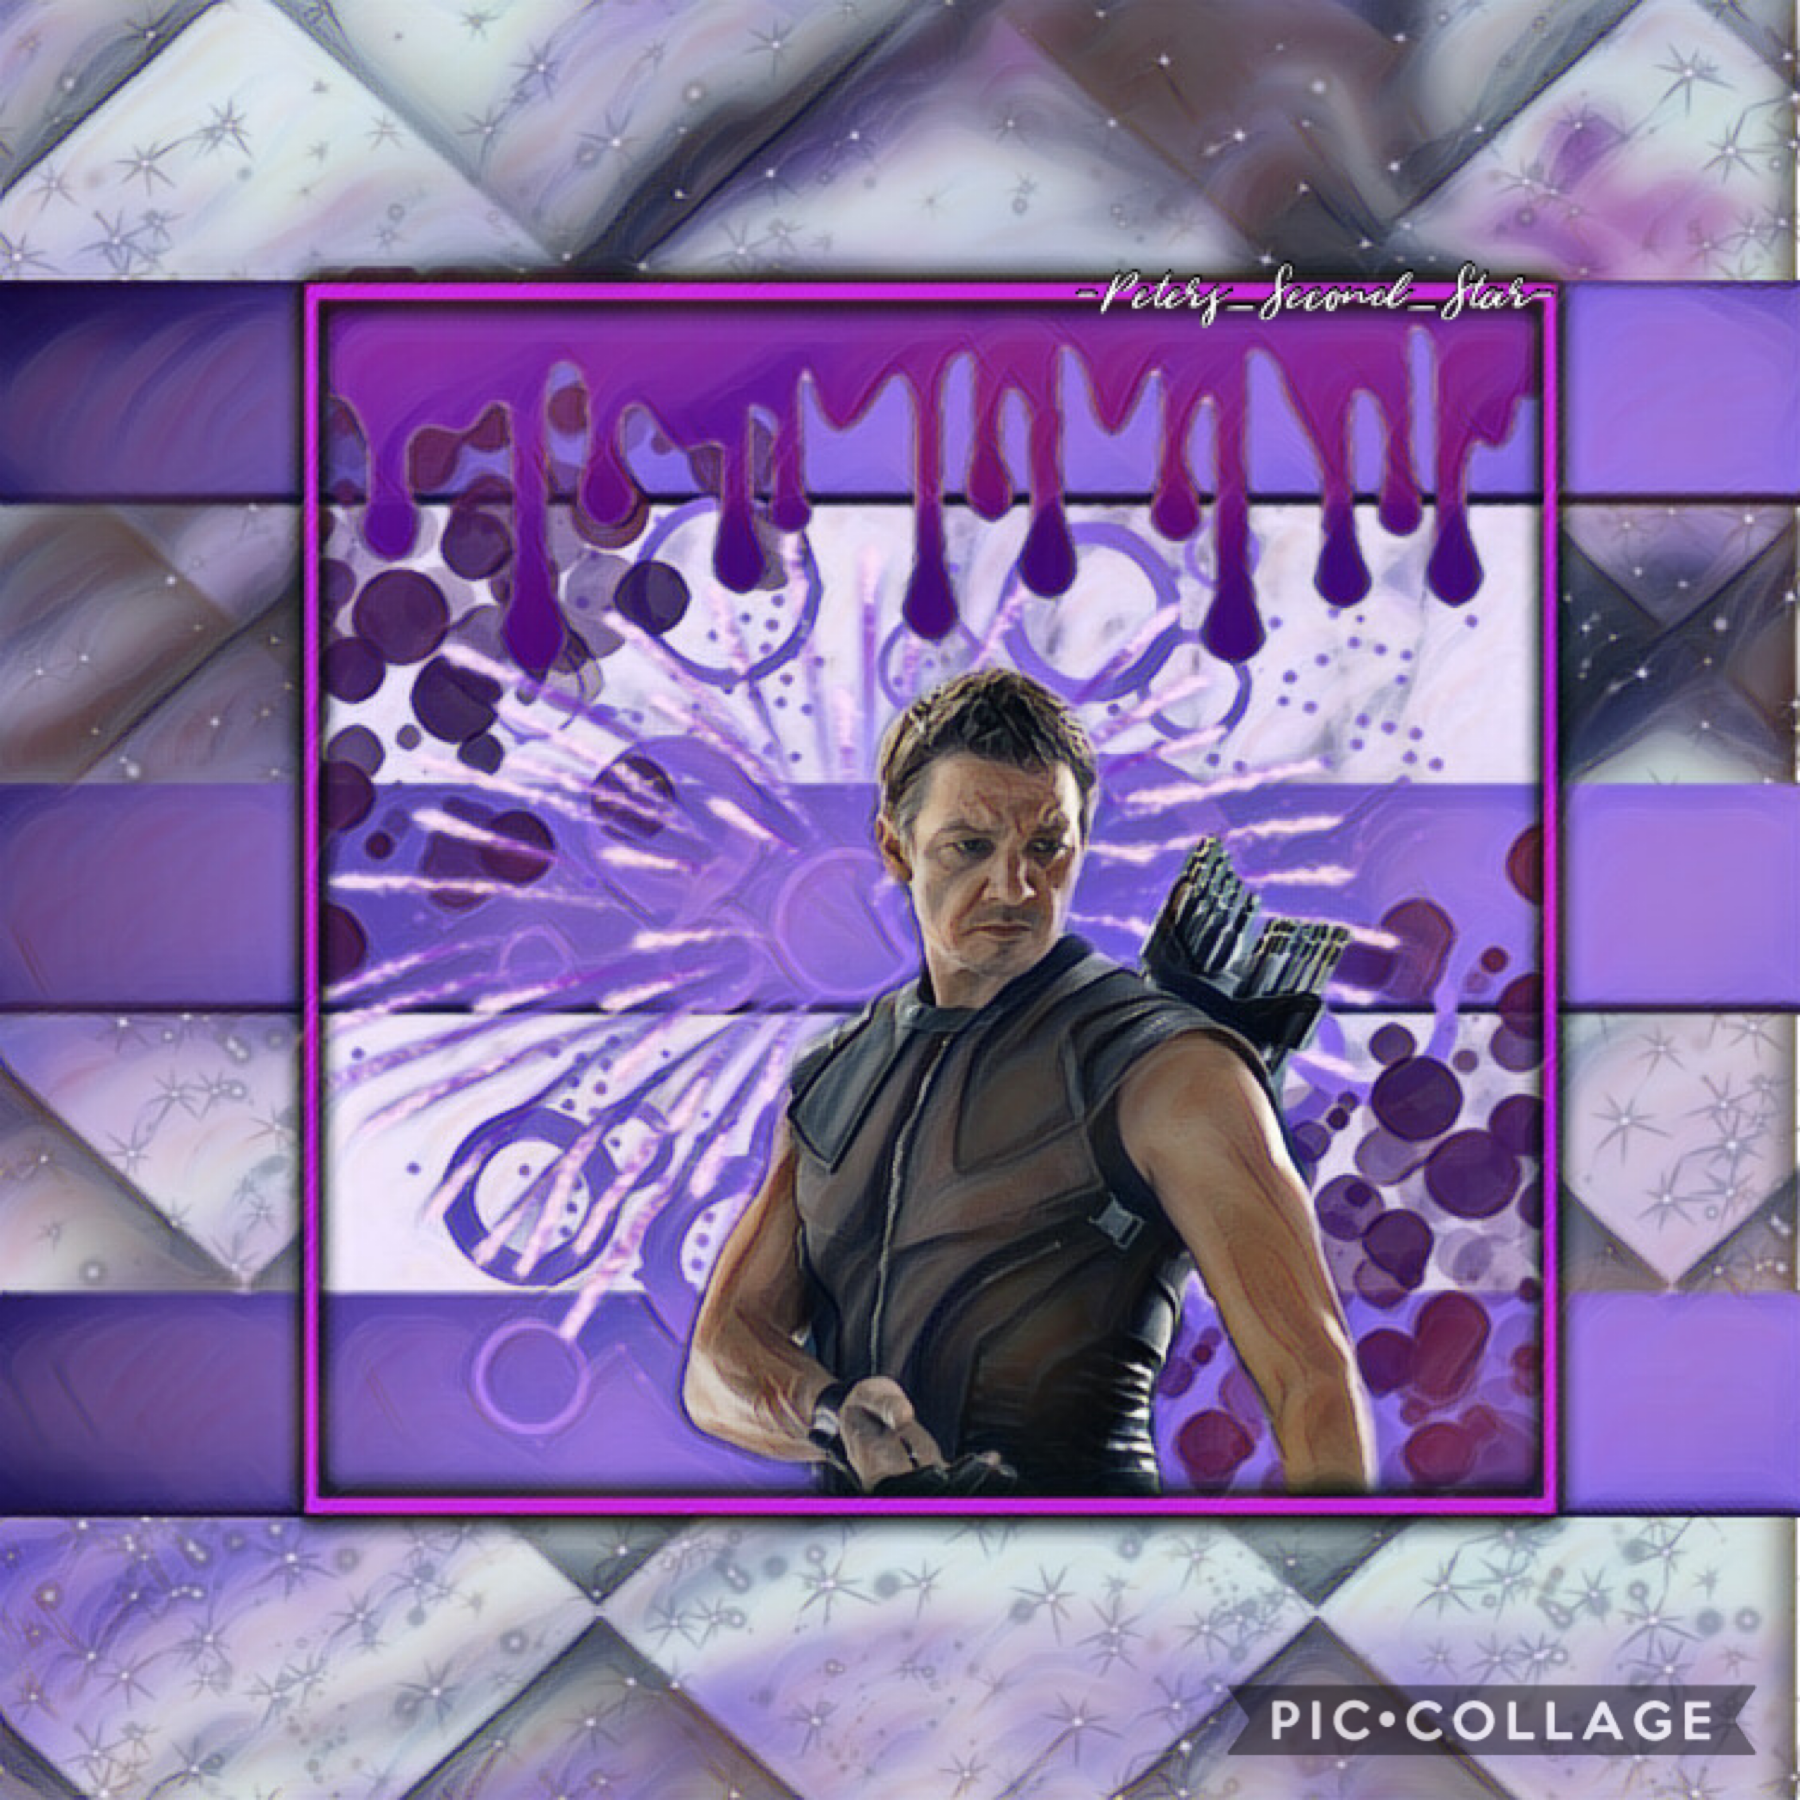 Tapp!!!

Starting this morning off right with Clint Barton!!

Rate /10💜
